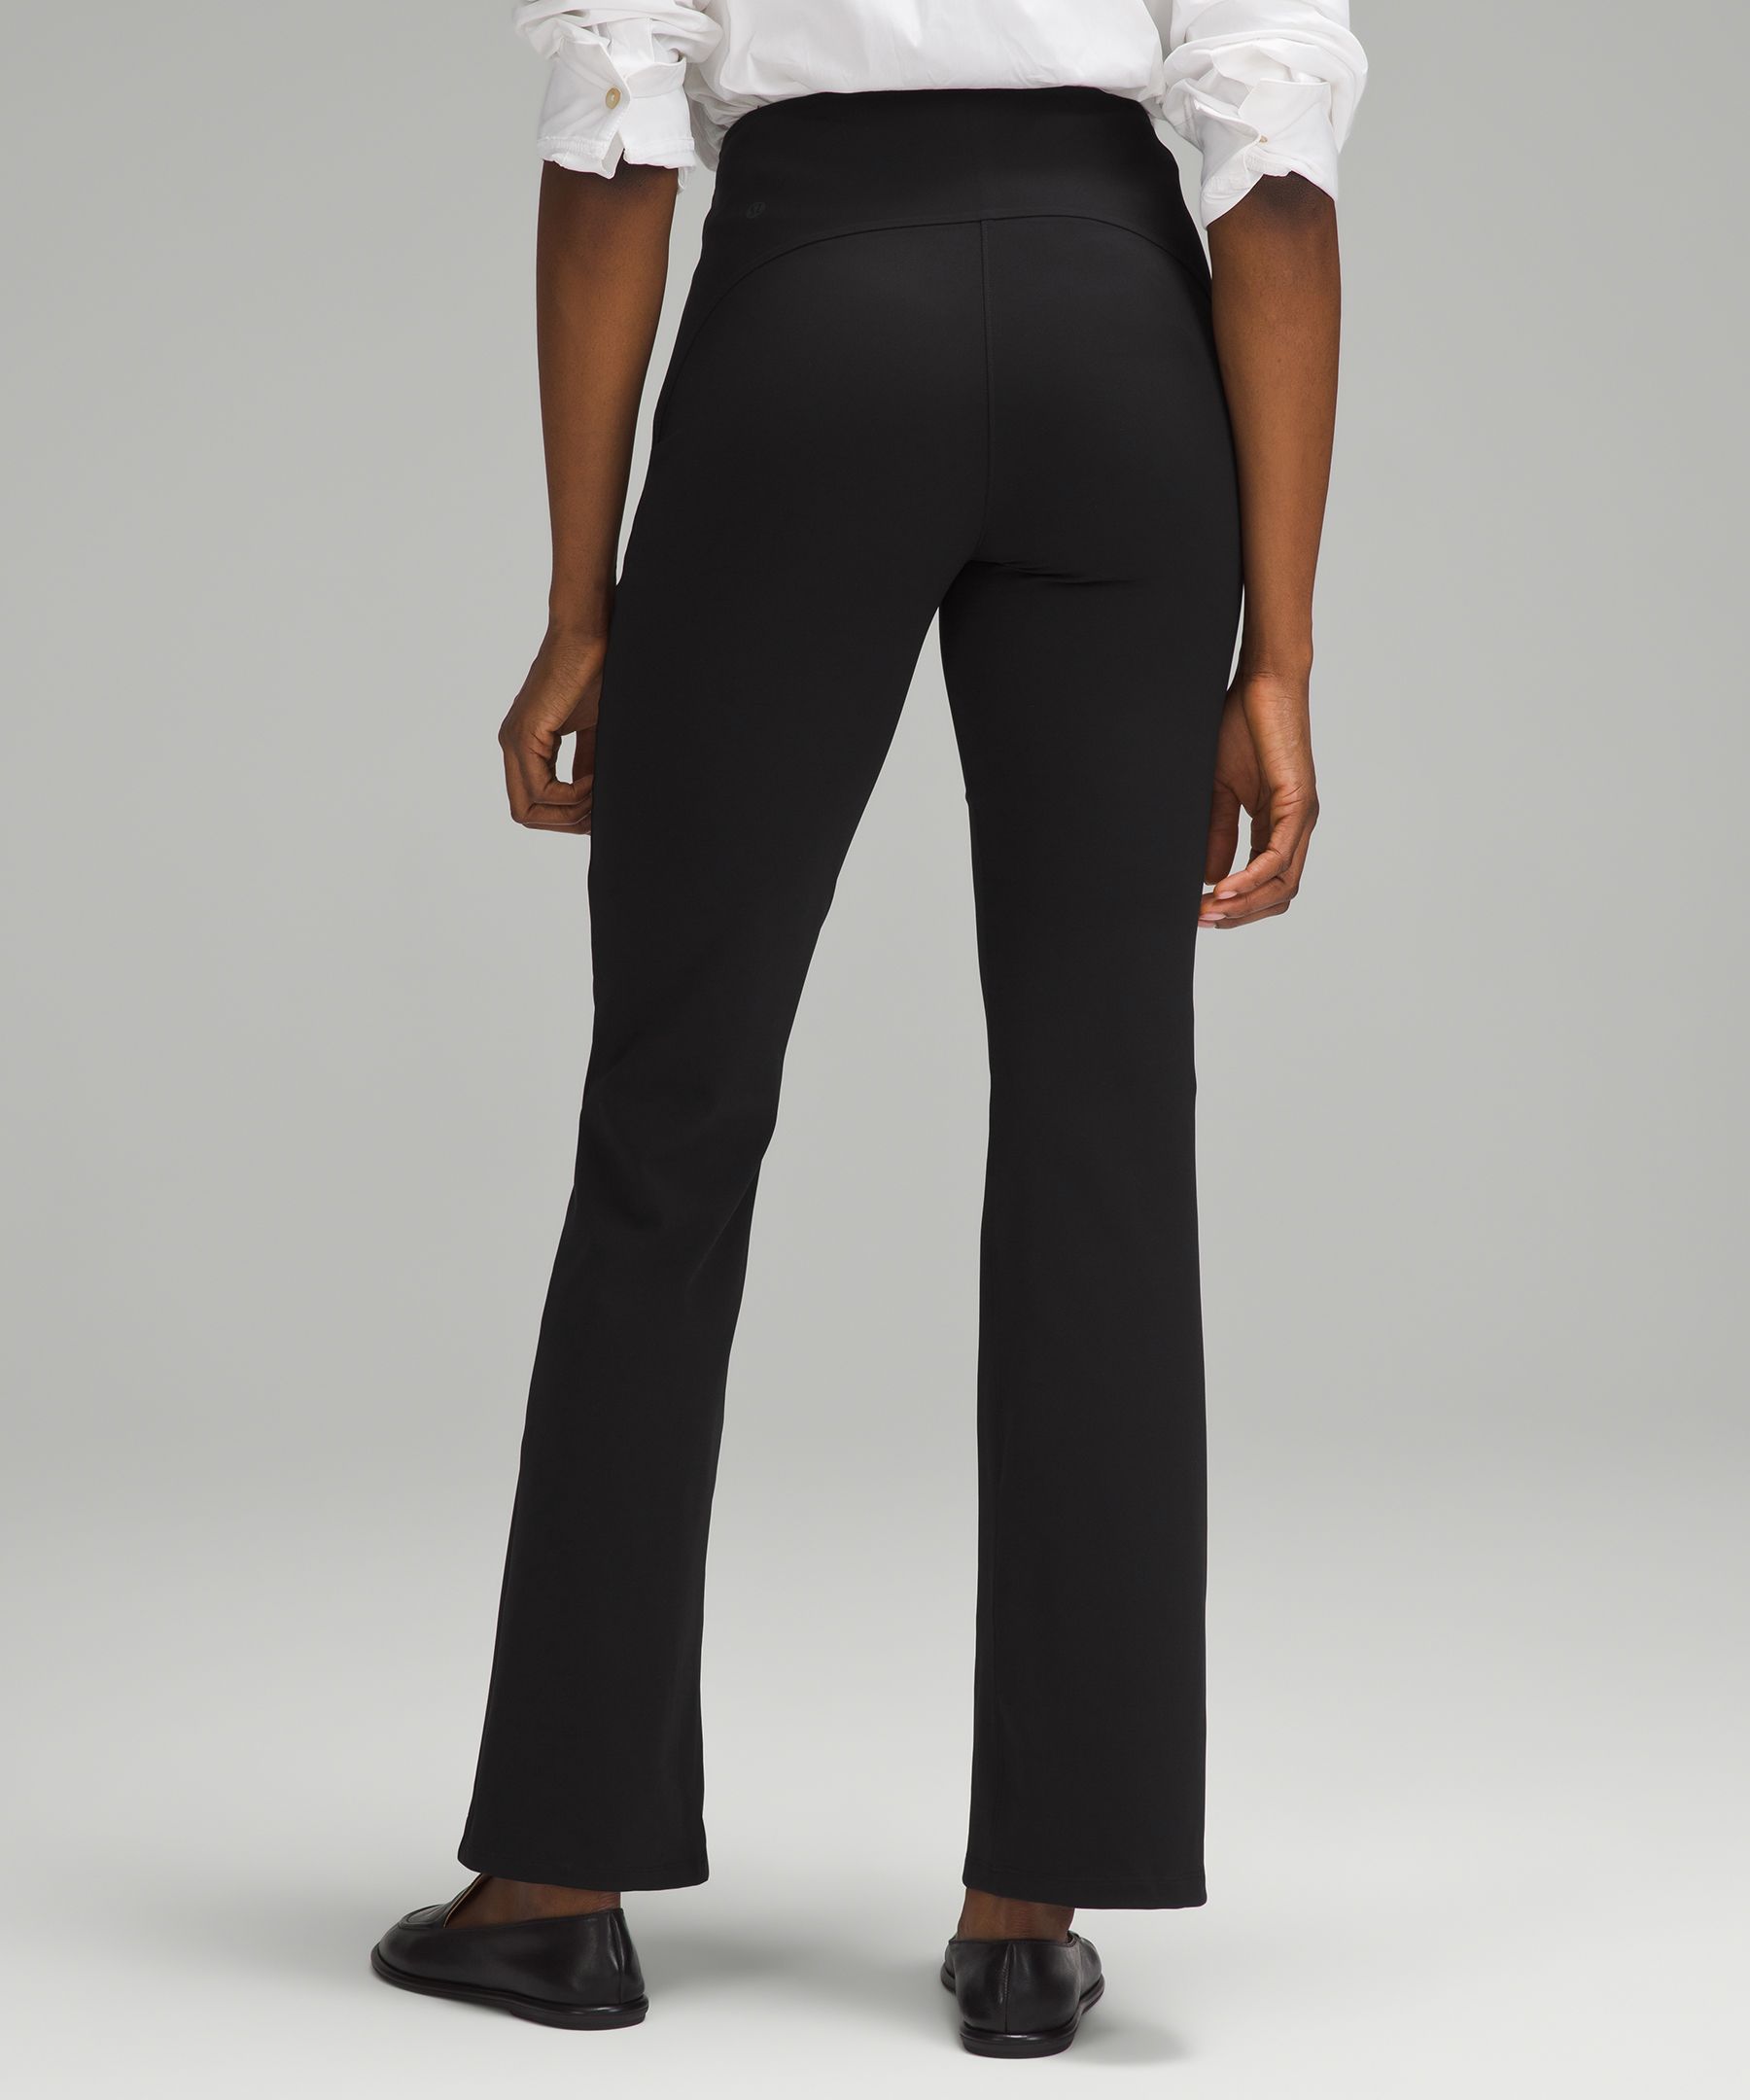 Lululemon athletica Smooth Fit Pull-On High-Rise Pant *Tall, Women's Pants